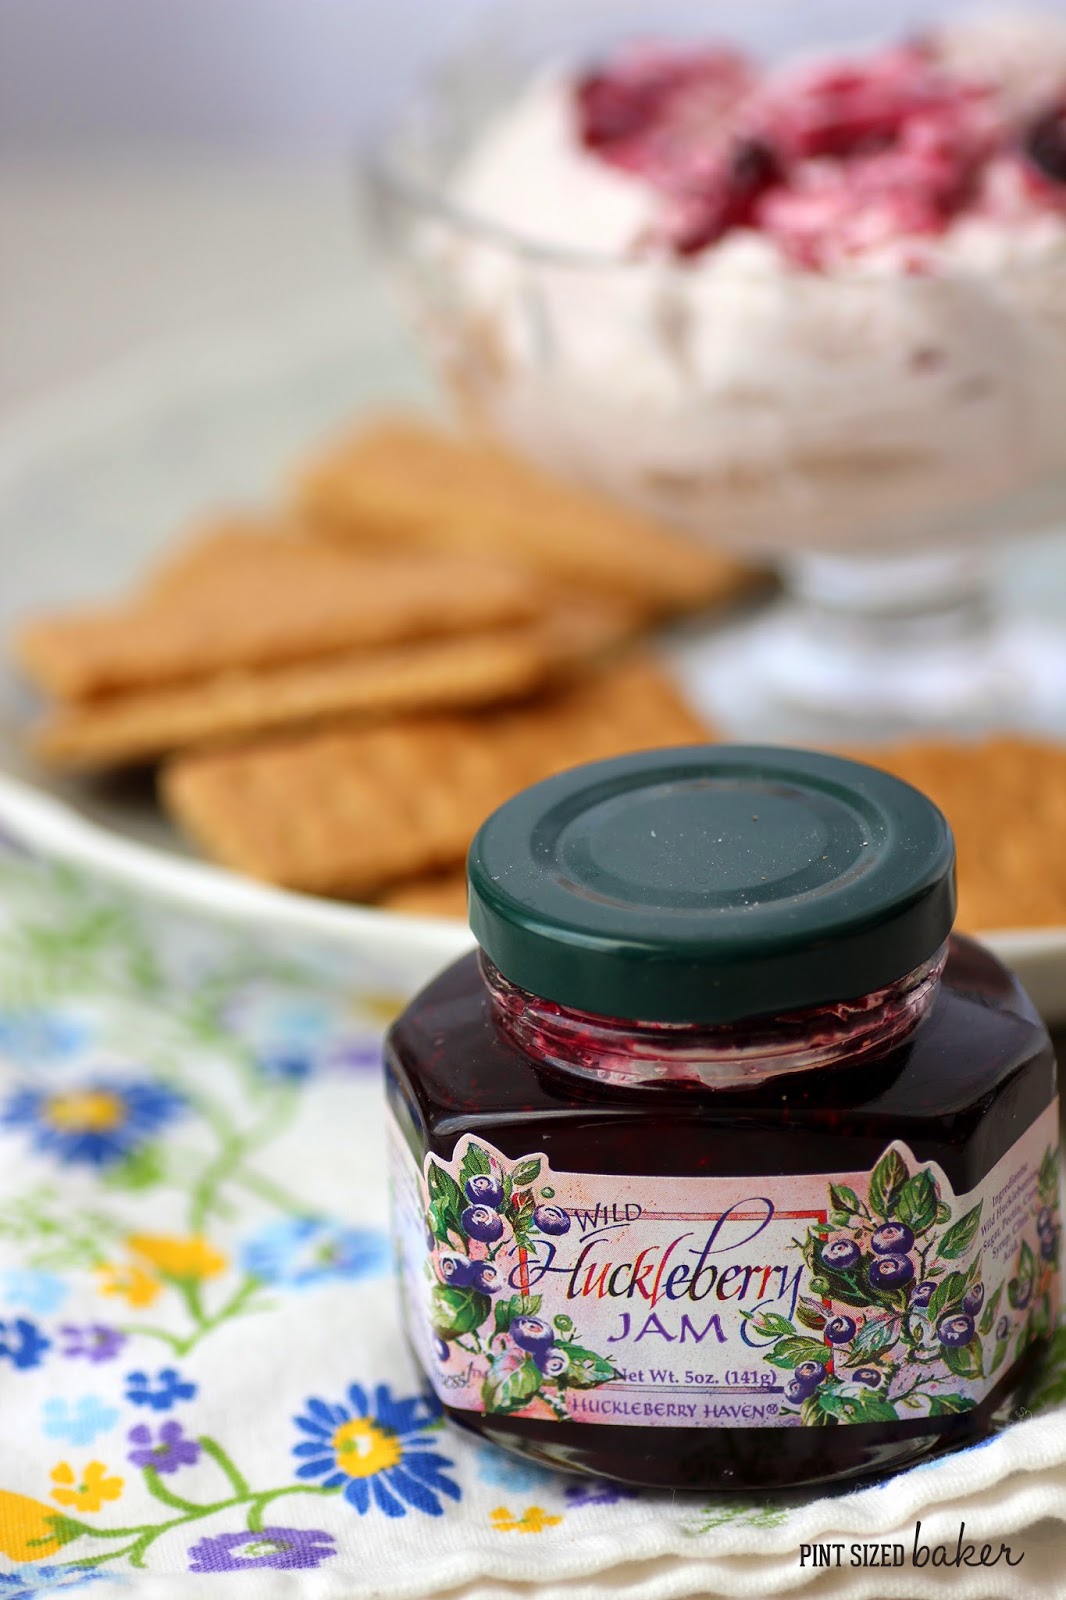 The wonderful flavor of Montana's huckleberries comes to your kitchen in this Huckleberry Jam Cheesecake Dip. It's a tasty party treat!